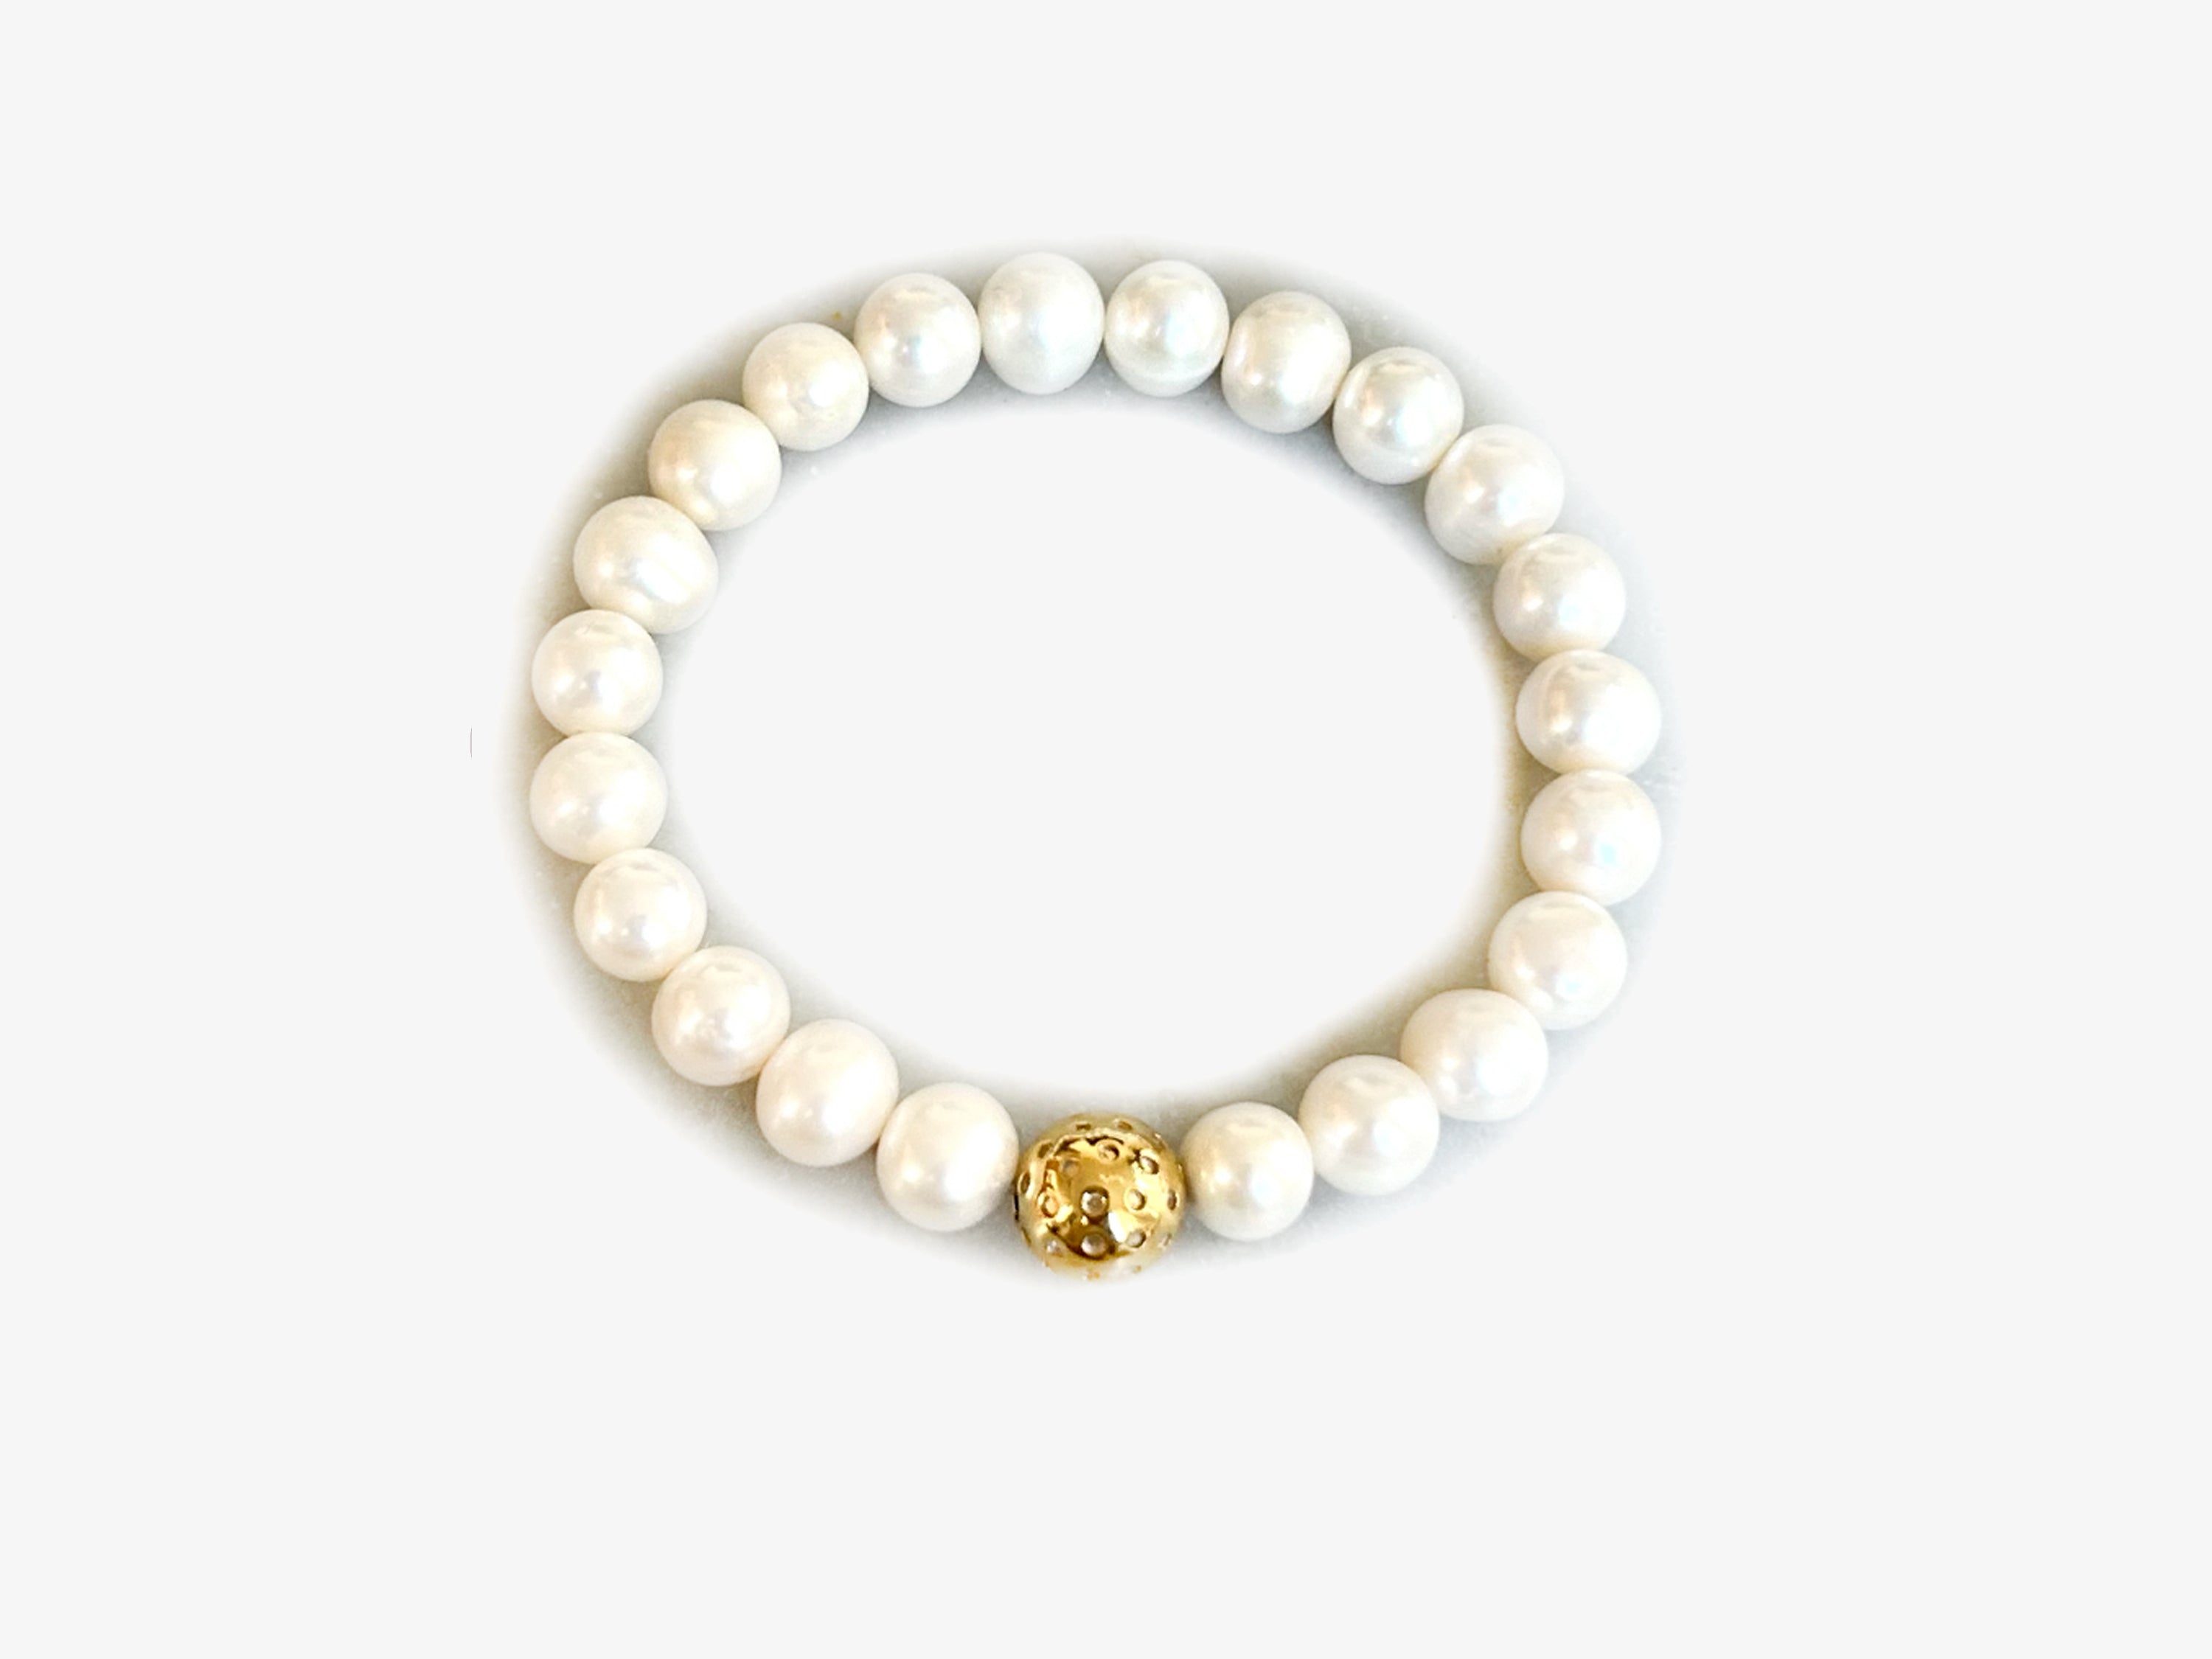 Freshwater Pearl Bracelet with Gold Vermeil Perforated Ball